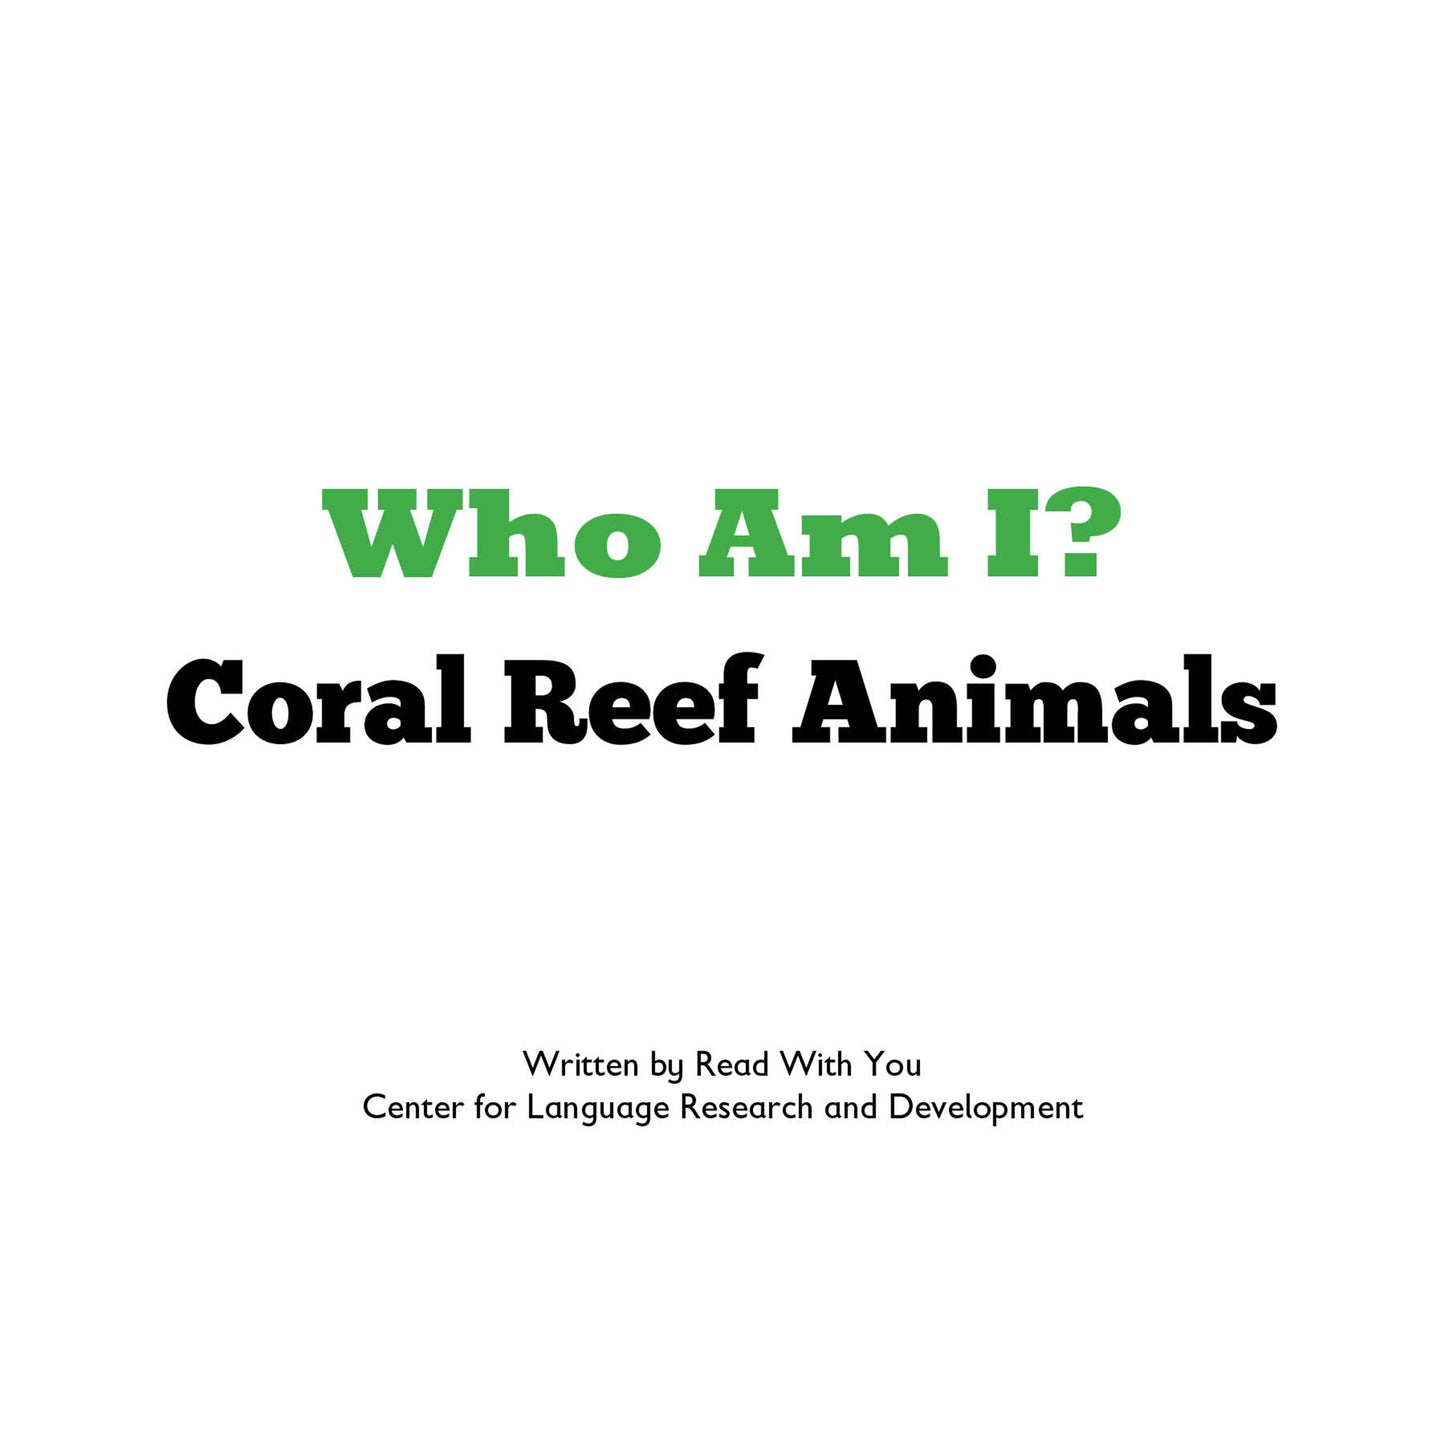 Coral Reef Animals